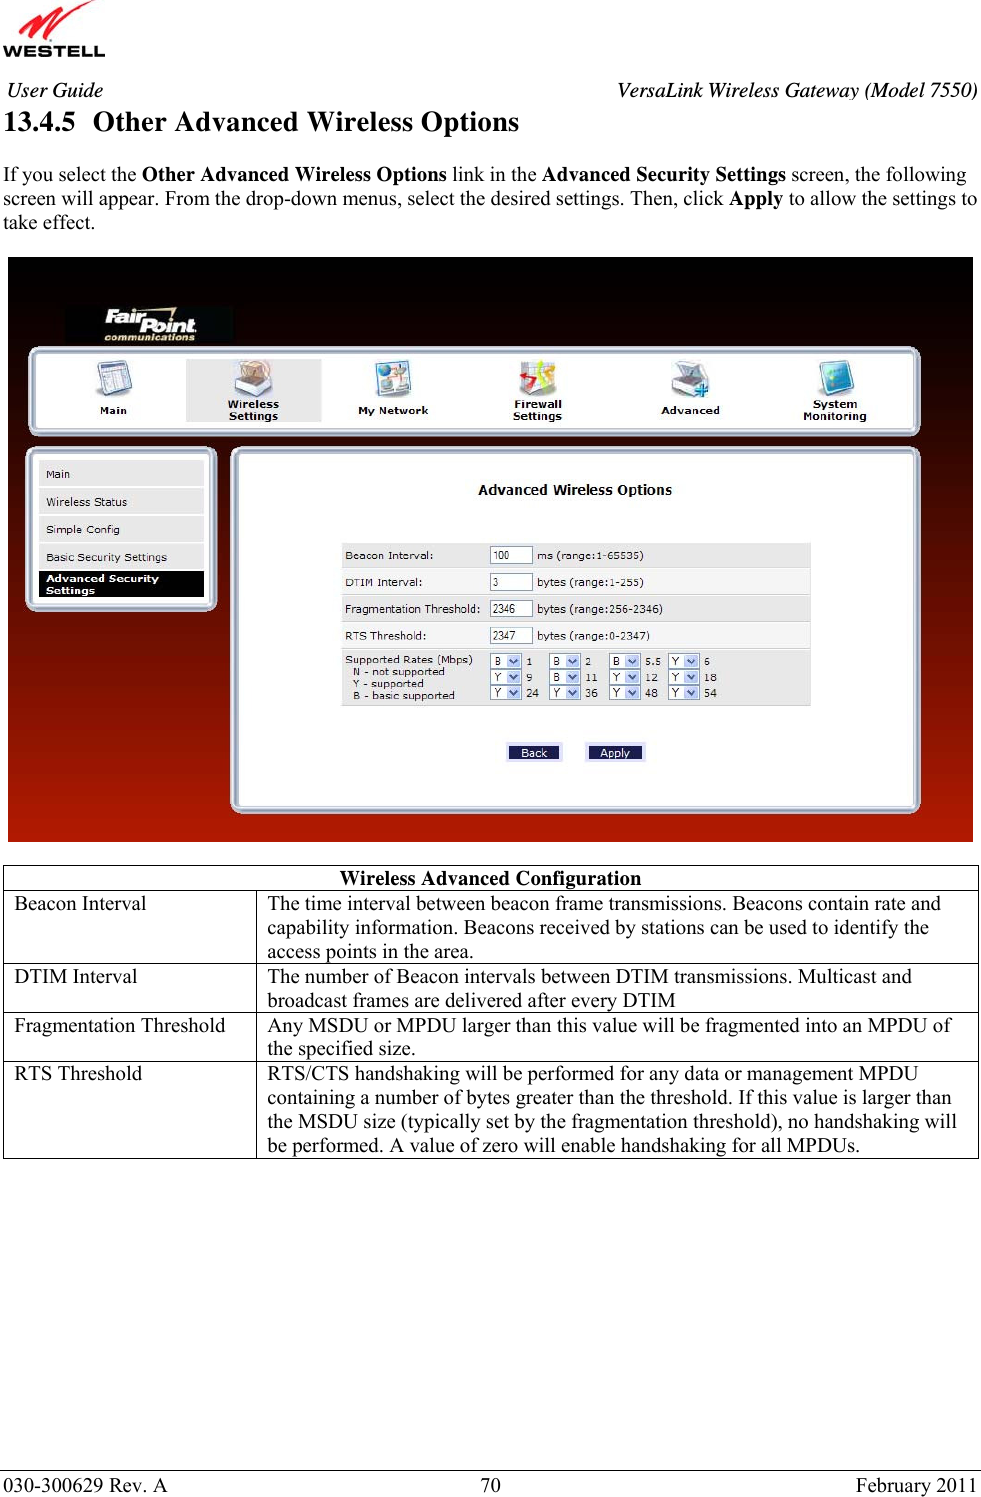       030-300629 Rev. A  70       February 2011 User Guide  VersaLink Wireless Gateway (Model 7550)13.4.5   Other Advanced Wireless Options  If you select the Other Advanced Wireless Options link in the Advanced Security Settings screen, the following screen will appear. From the drop-down menus, select the desired settings. Then, click Apply to allow the settings to take effect.    Wireless Advanced Configuration Beacon Interval  The time interval between beacon frame transmissions. Beacons contain rate and capability information. Beacons received by stations can be used to identify the access points in the area. DTIM Interval  The number of Beacon intervals between DTIM transmissions. Multicast and broadcast frames are delivered after every DTIM Fragmentation Threshold  Any MSDU or MPDU larger than this value will be fragmented into an MPDU of the specified size. RTS Threshold  RTS/CTS handshaking will be performed for any data or management MPDU containing a number of bytes greater than the threshold. If this value is larger than the MSDU size (typically set by the fragmentation threshold), no handshaking will be performed. A value of zero will enable handshaking for all MPDUs.   